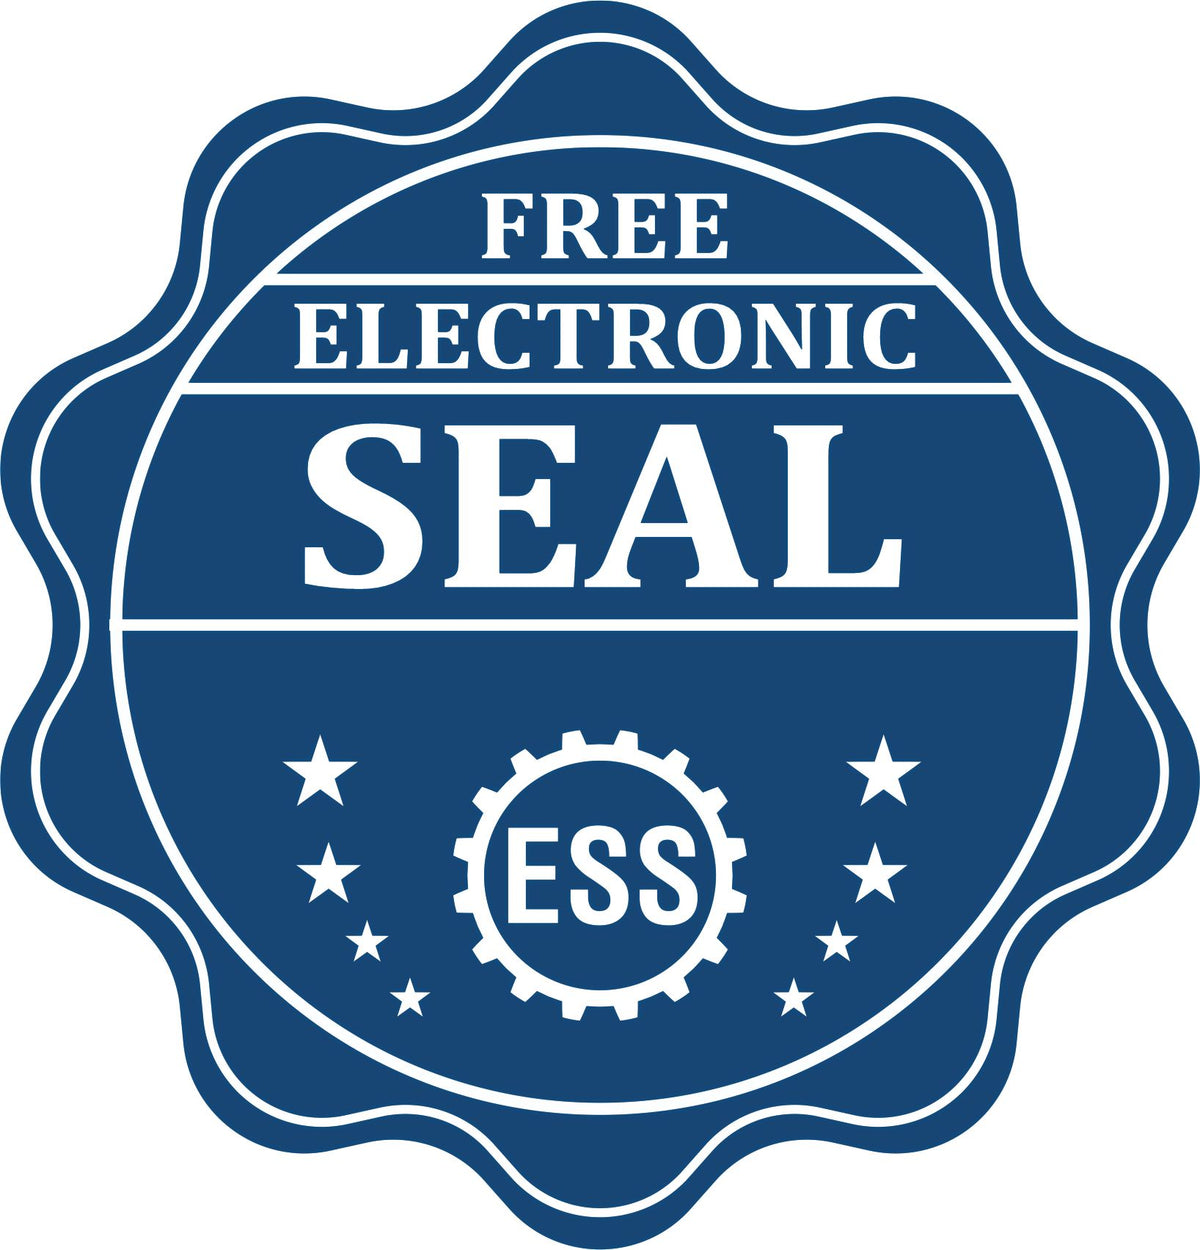 A badge showing a free electronic seal for the Long Reach Alaska Geology Seal with stars and the ESS gear on the emblem.